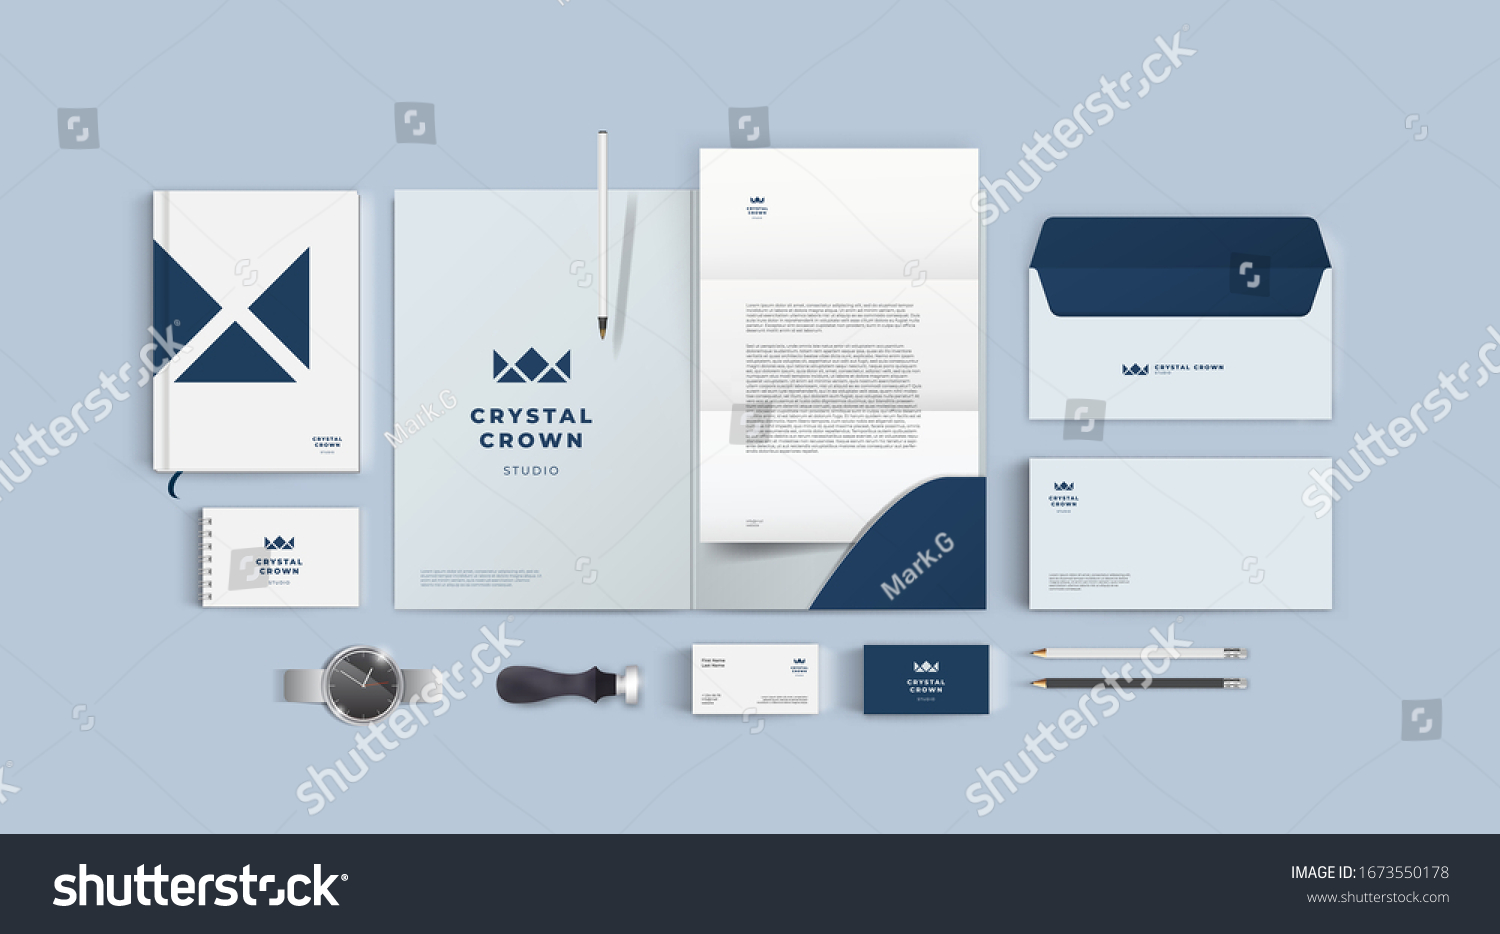 Stationery design mock up set for corporate identity or branding. Dark blue color style and grey background. Realistic top view corporate style set. #1673550178